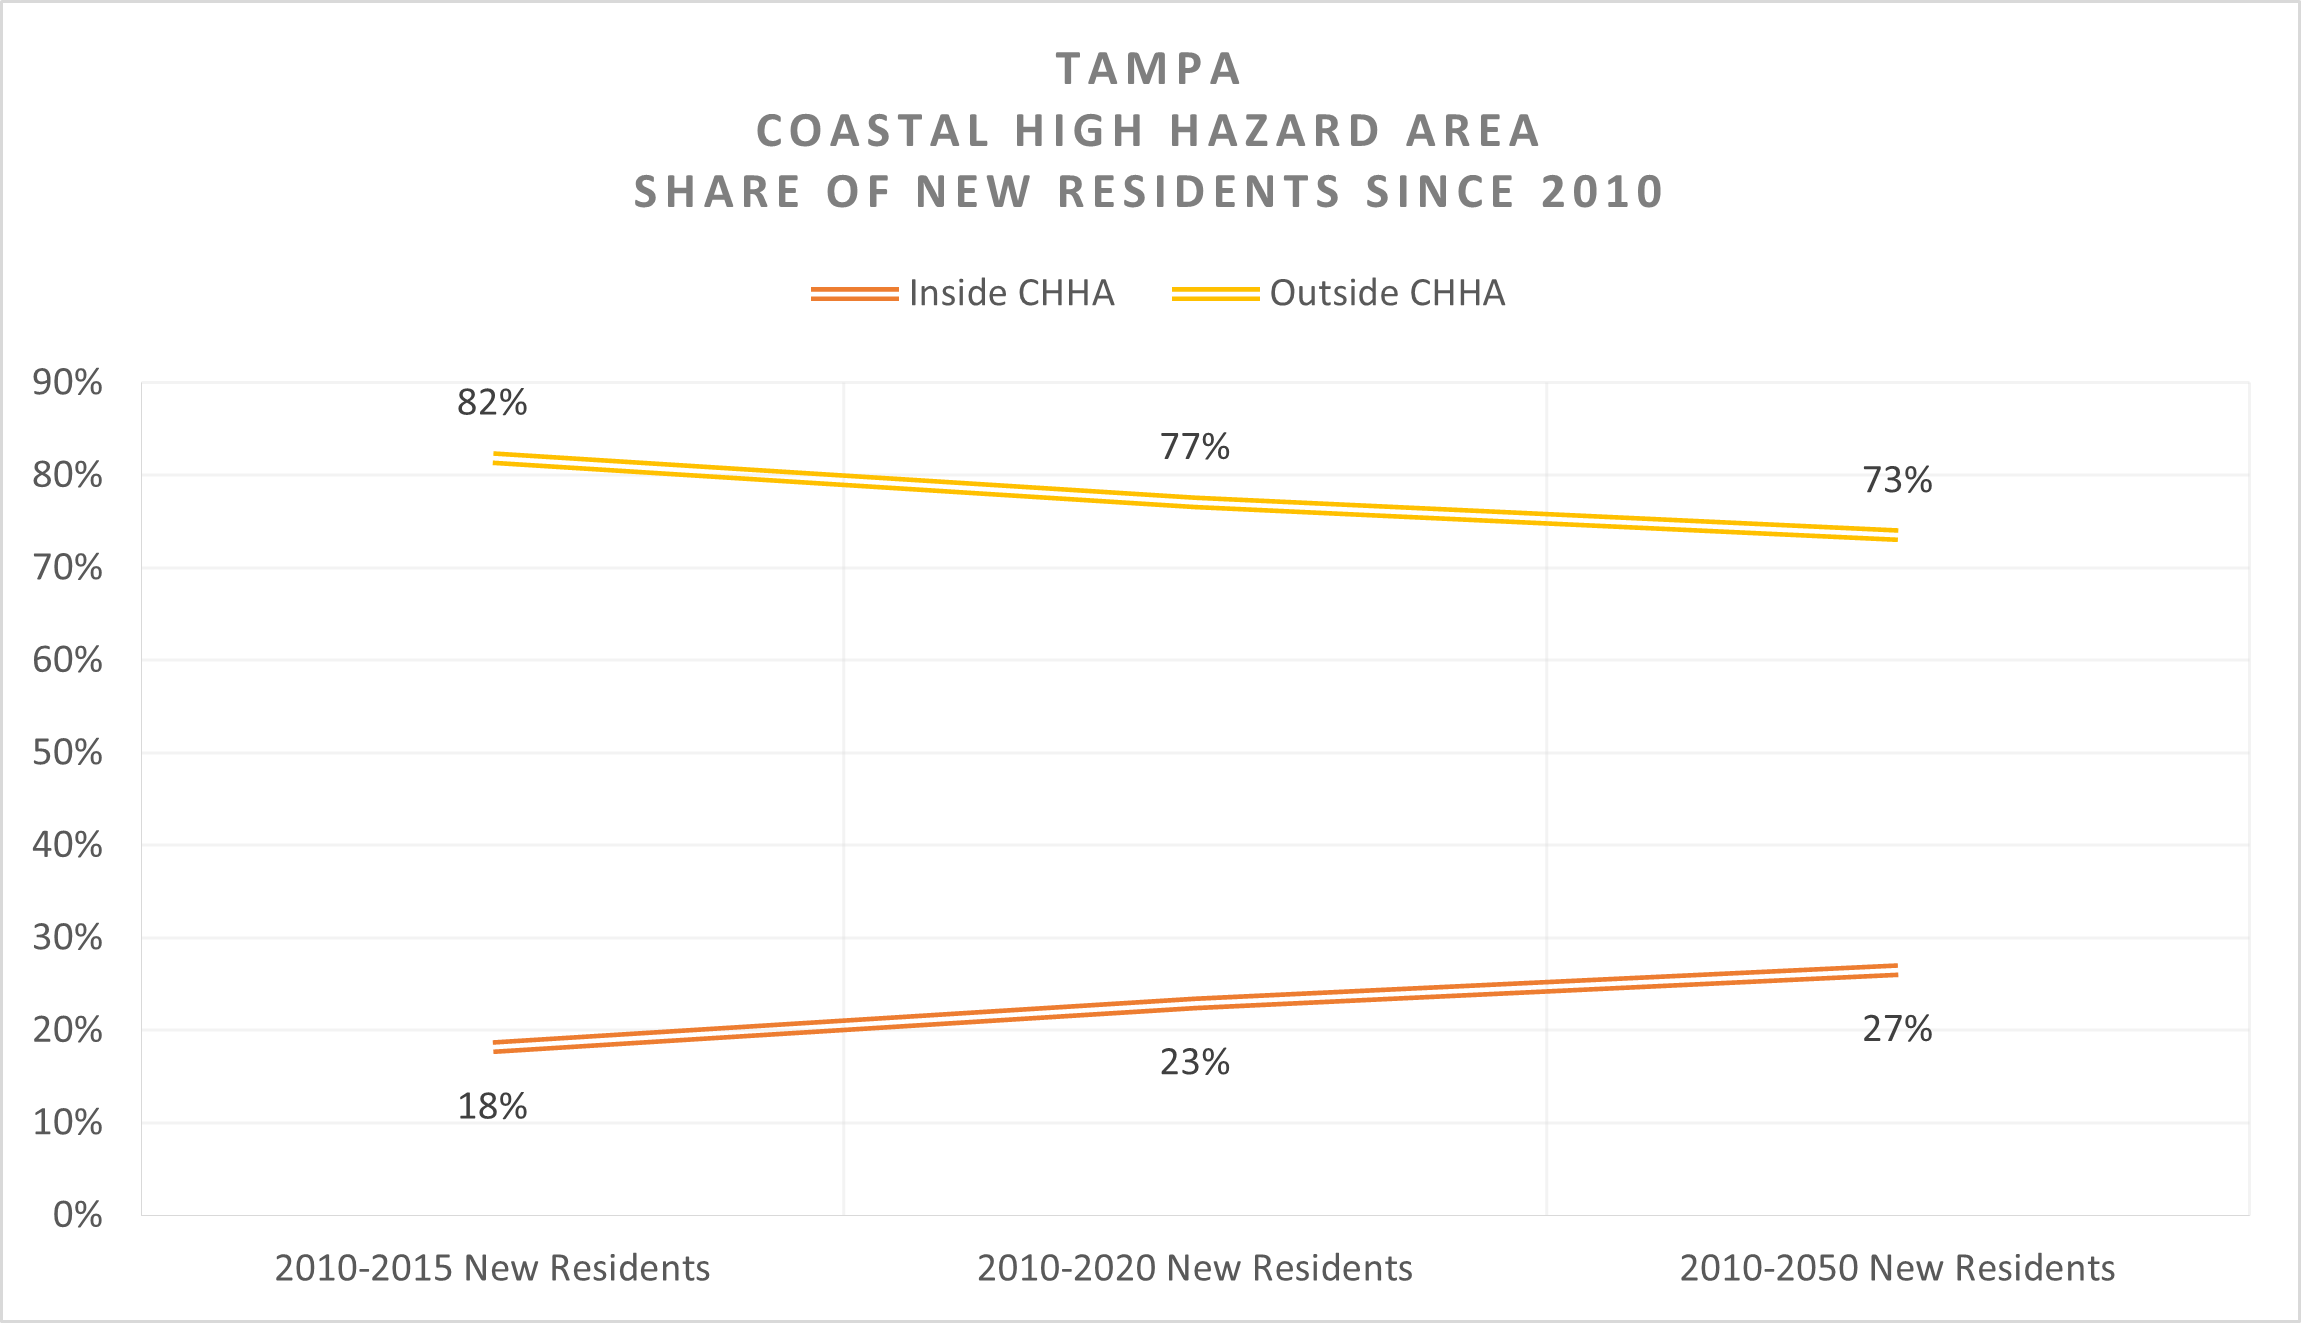 This chart shows Tampa's share of new residents since 2010 inside and outside the CHHA. From 2010 to 2020, 23% of the new residents moved inside the CHHA and 77% of new residents moved outside CHHA. From 2010 to 2050, the share are expected to decrease slightly. Namely, 27% of the new residents are expected to move inside the CHHA and 73% of the new residents are expected to move outside CHHA.